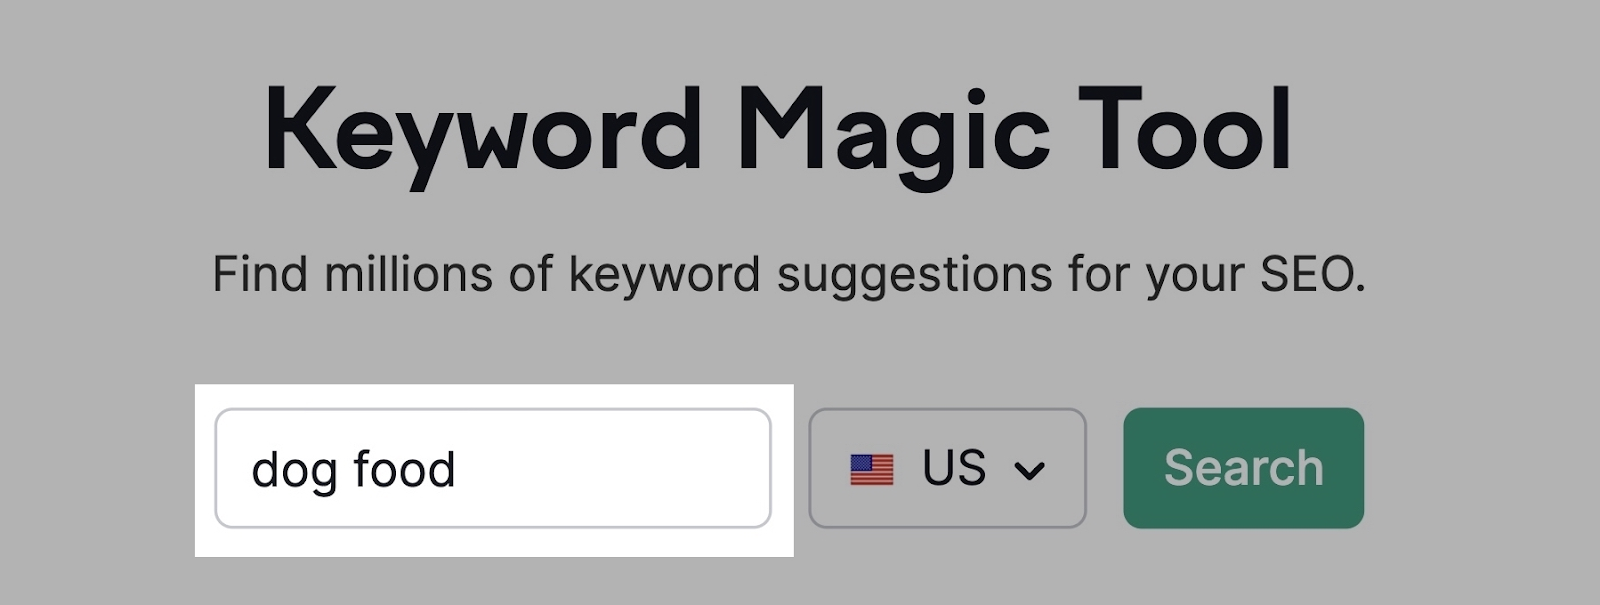 search for “dog food” in Keyword Magic tool